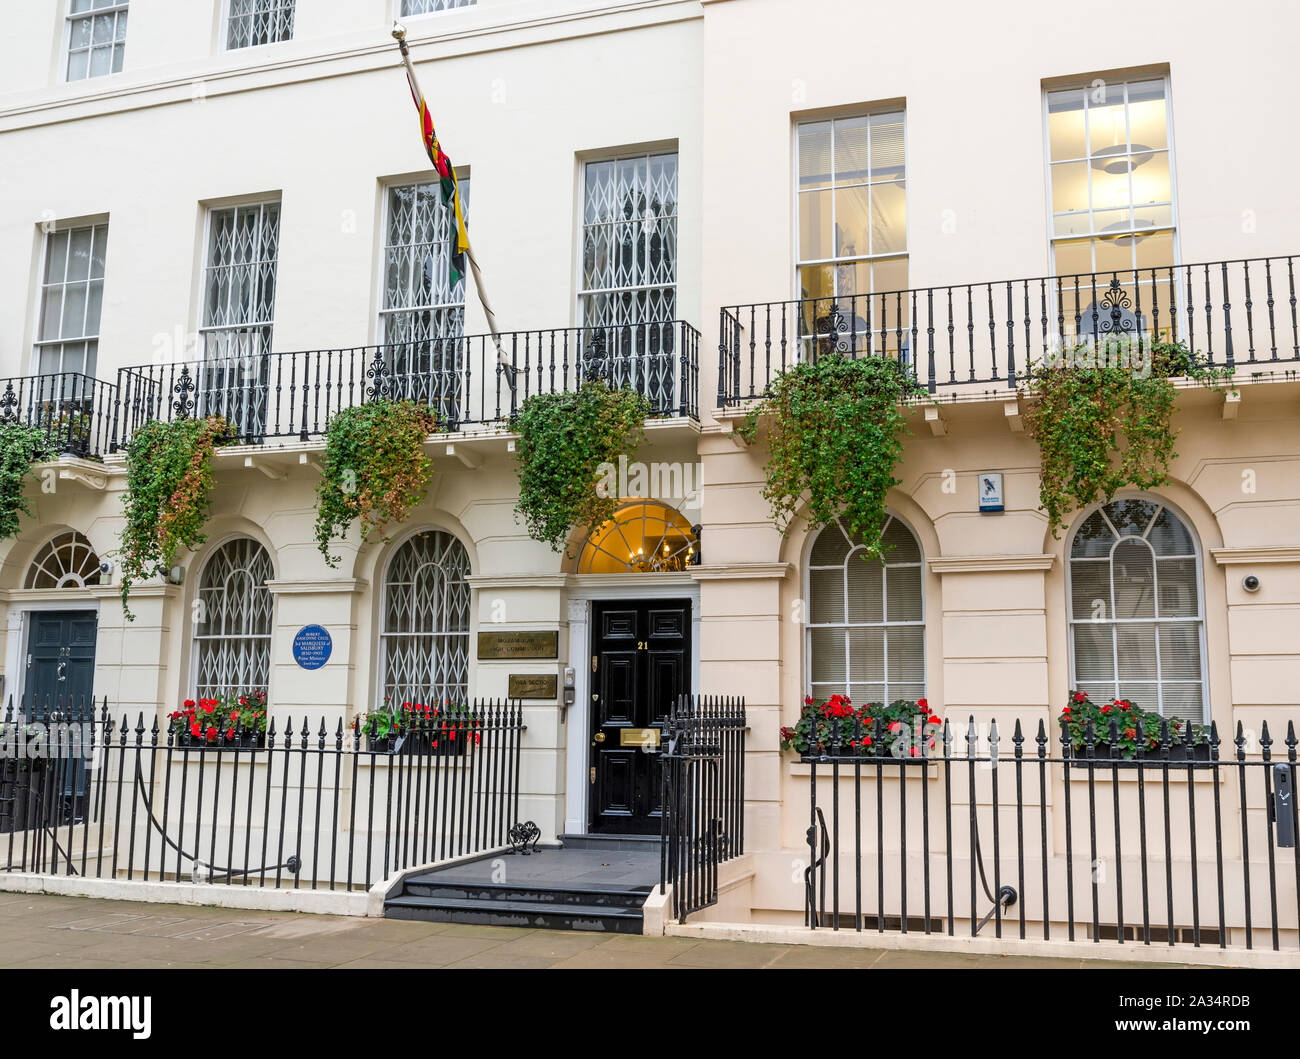 Mozambique High Commission on Fitzroy square, central London, United Kingdom Stock Photo